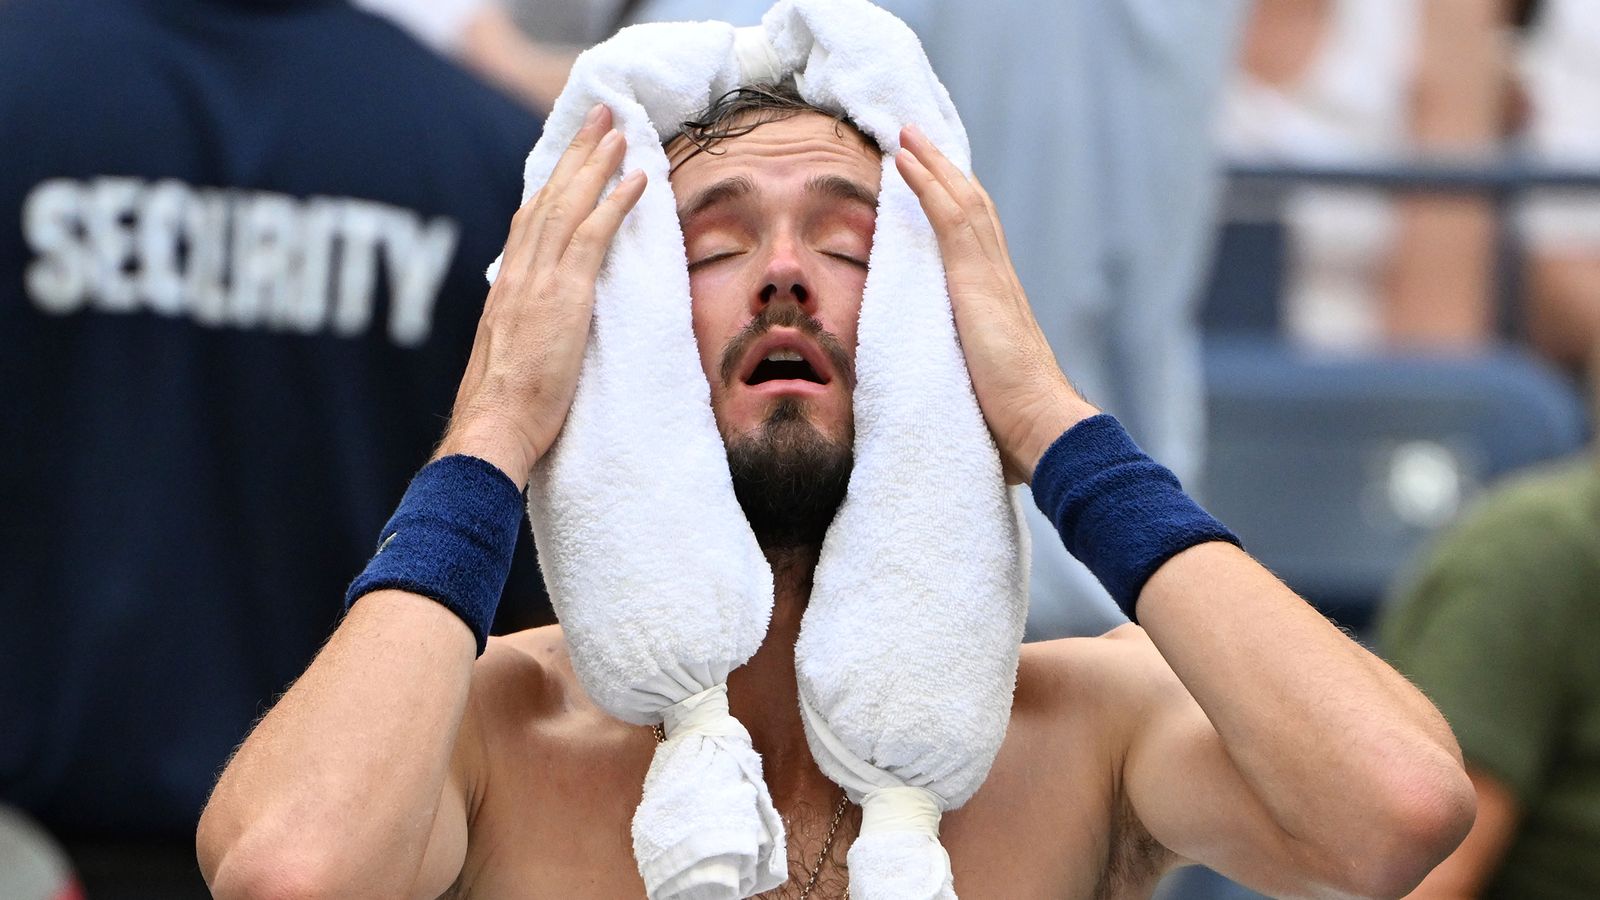 ‘One player is going to die’: Tennis star’s shock outburst as he plays final in scorching conditions